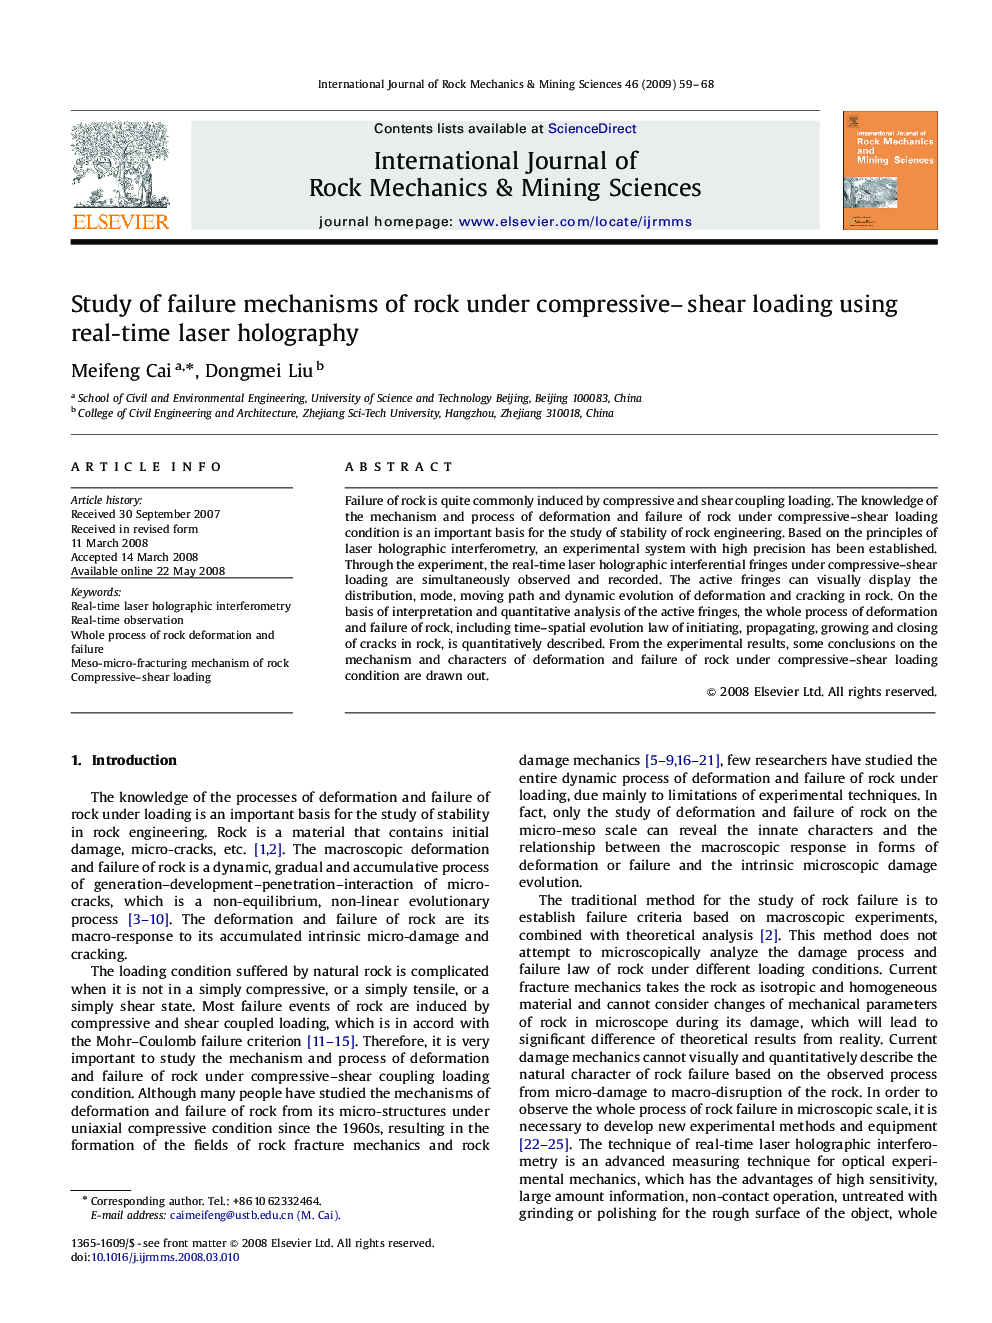 Study of failure mechanisms of rock under compressive–shear loading using real-time laser holography